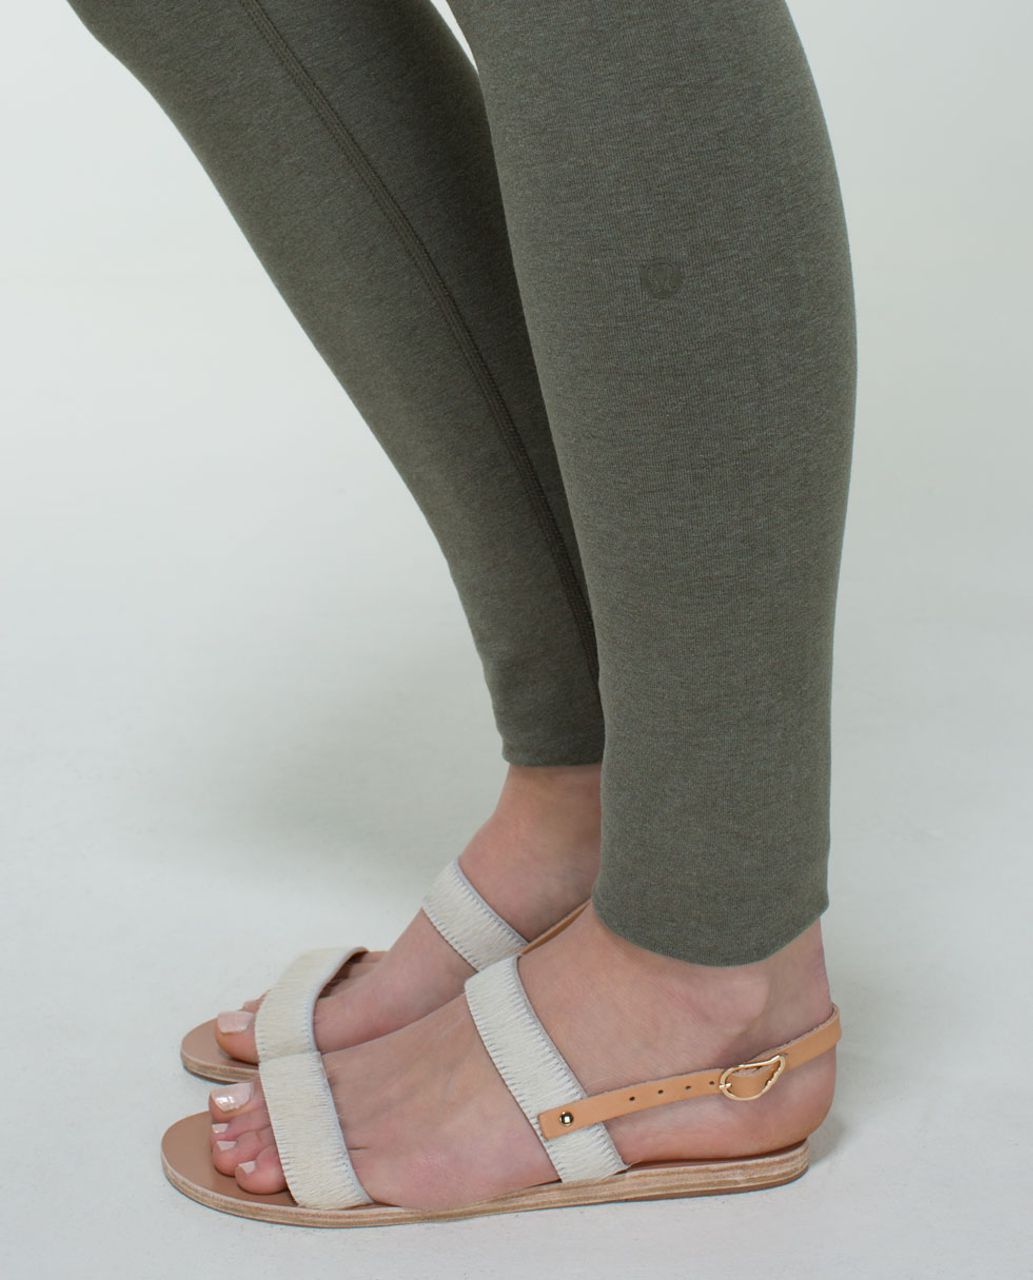 Lululemon Wunder Under Pant (Roll Down) *Cotton - Heathered Fatigue Green